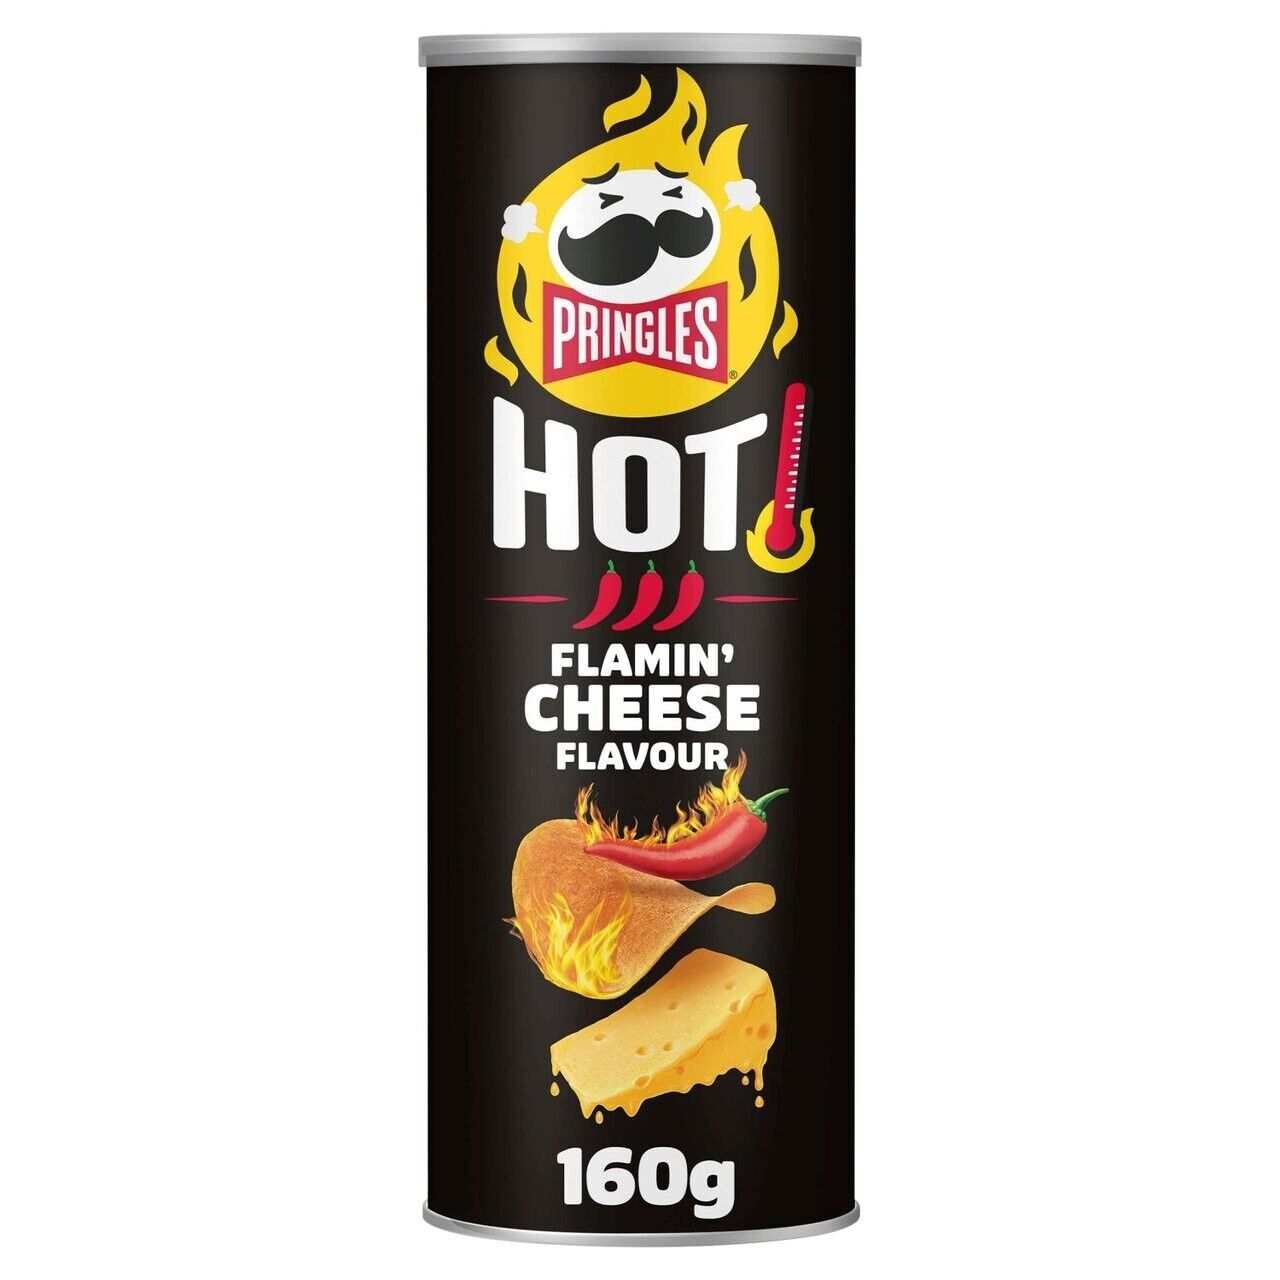 PRINGLES FLAMIN' CHEESE FLAVOUR